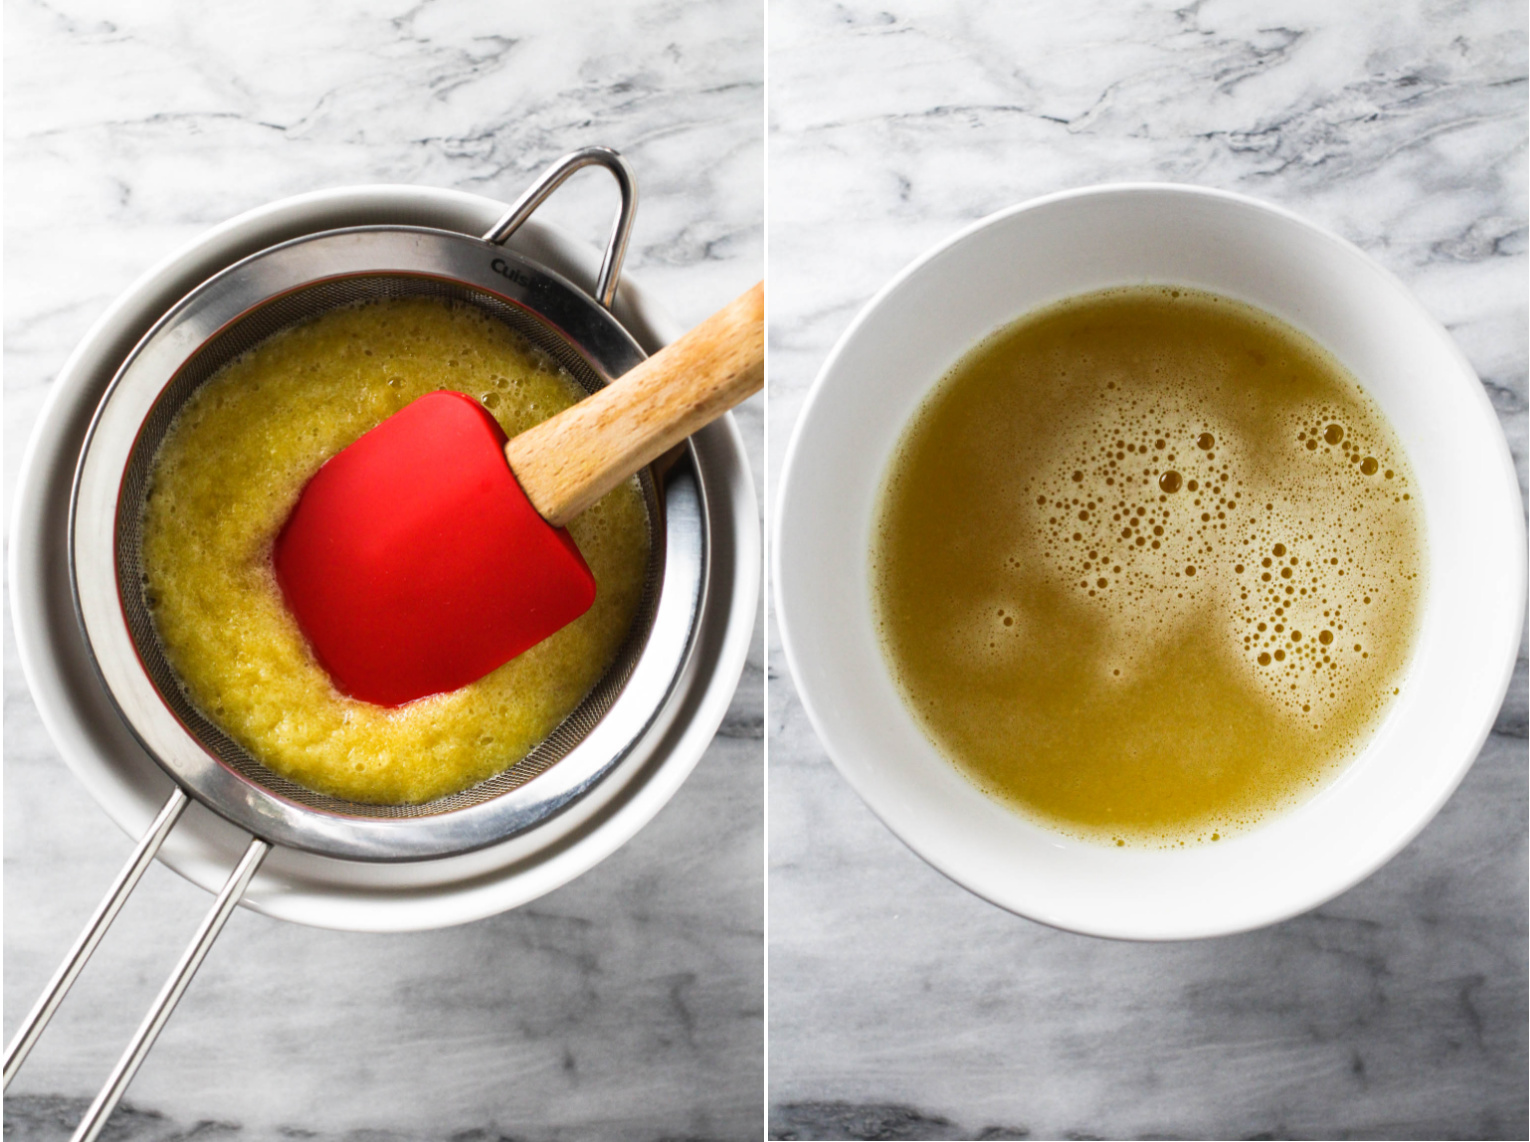 Two side-by-side images, on the left, an image of pineapple puree in a mesh strainer over a bowl. The puree is being pushed with a rubber spatula. On the right, an image of pineapple juice in a bowl.